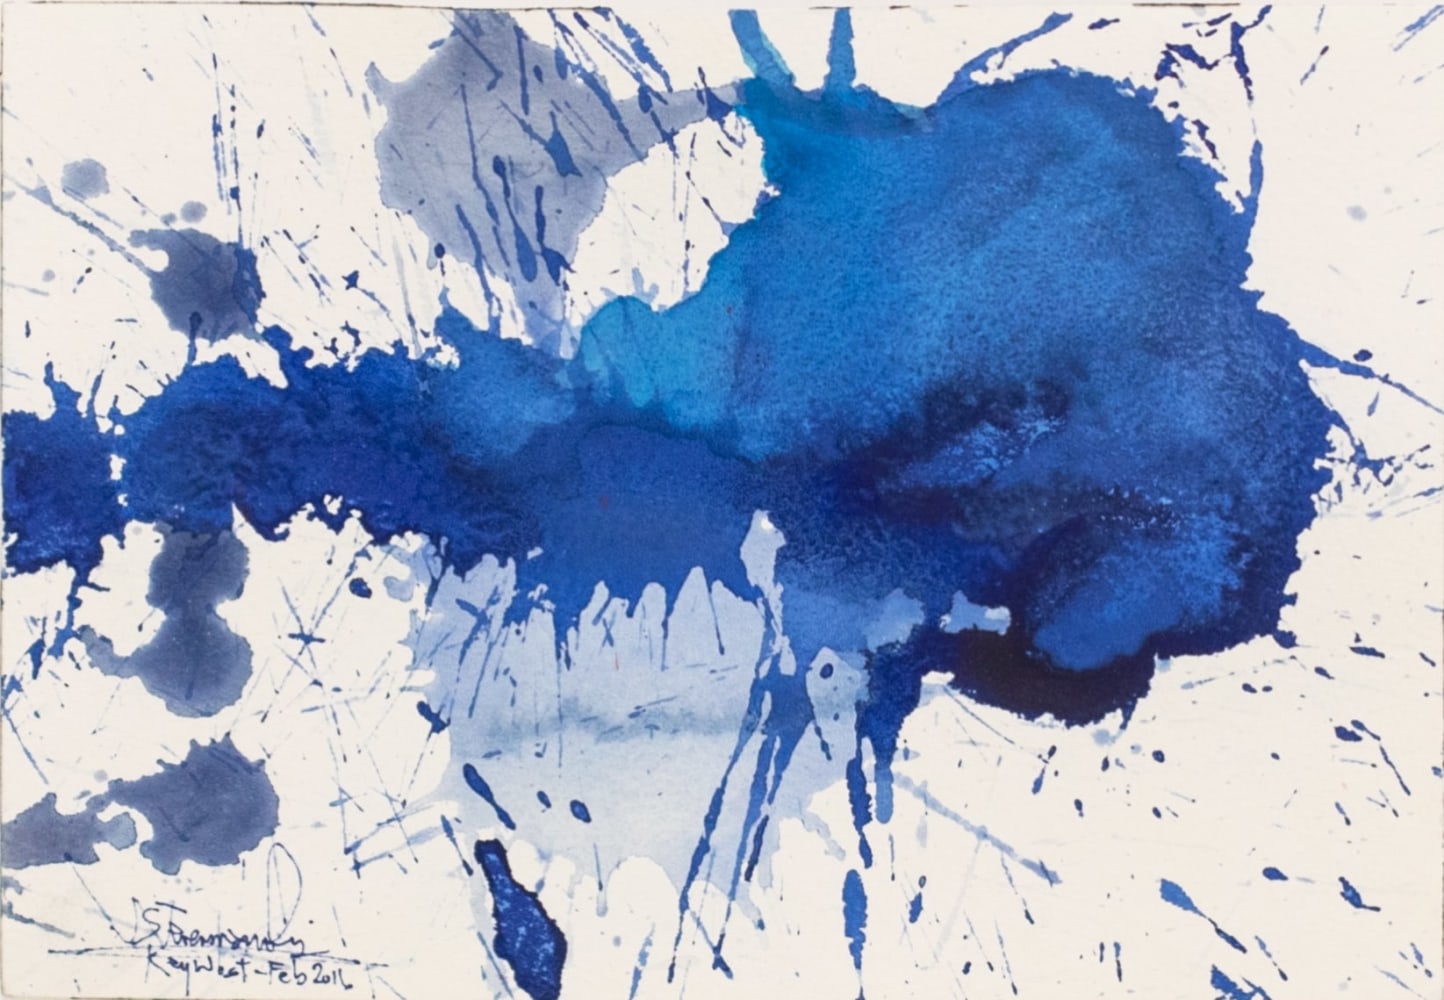 J. Steven Manolis, Splash (Key West) 07.10.02, 2016, watercolor painting on paper, 7 x 10 inches, Blue Abstract Art, Splash Art for sale at Manolis Projects Art Gallery, Miami, Fl